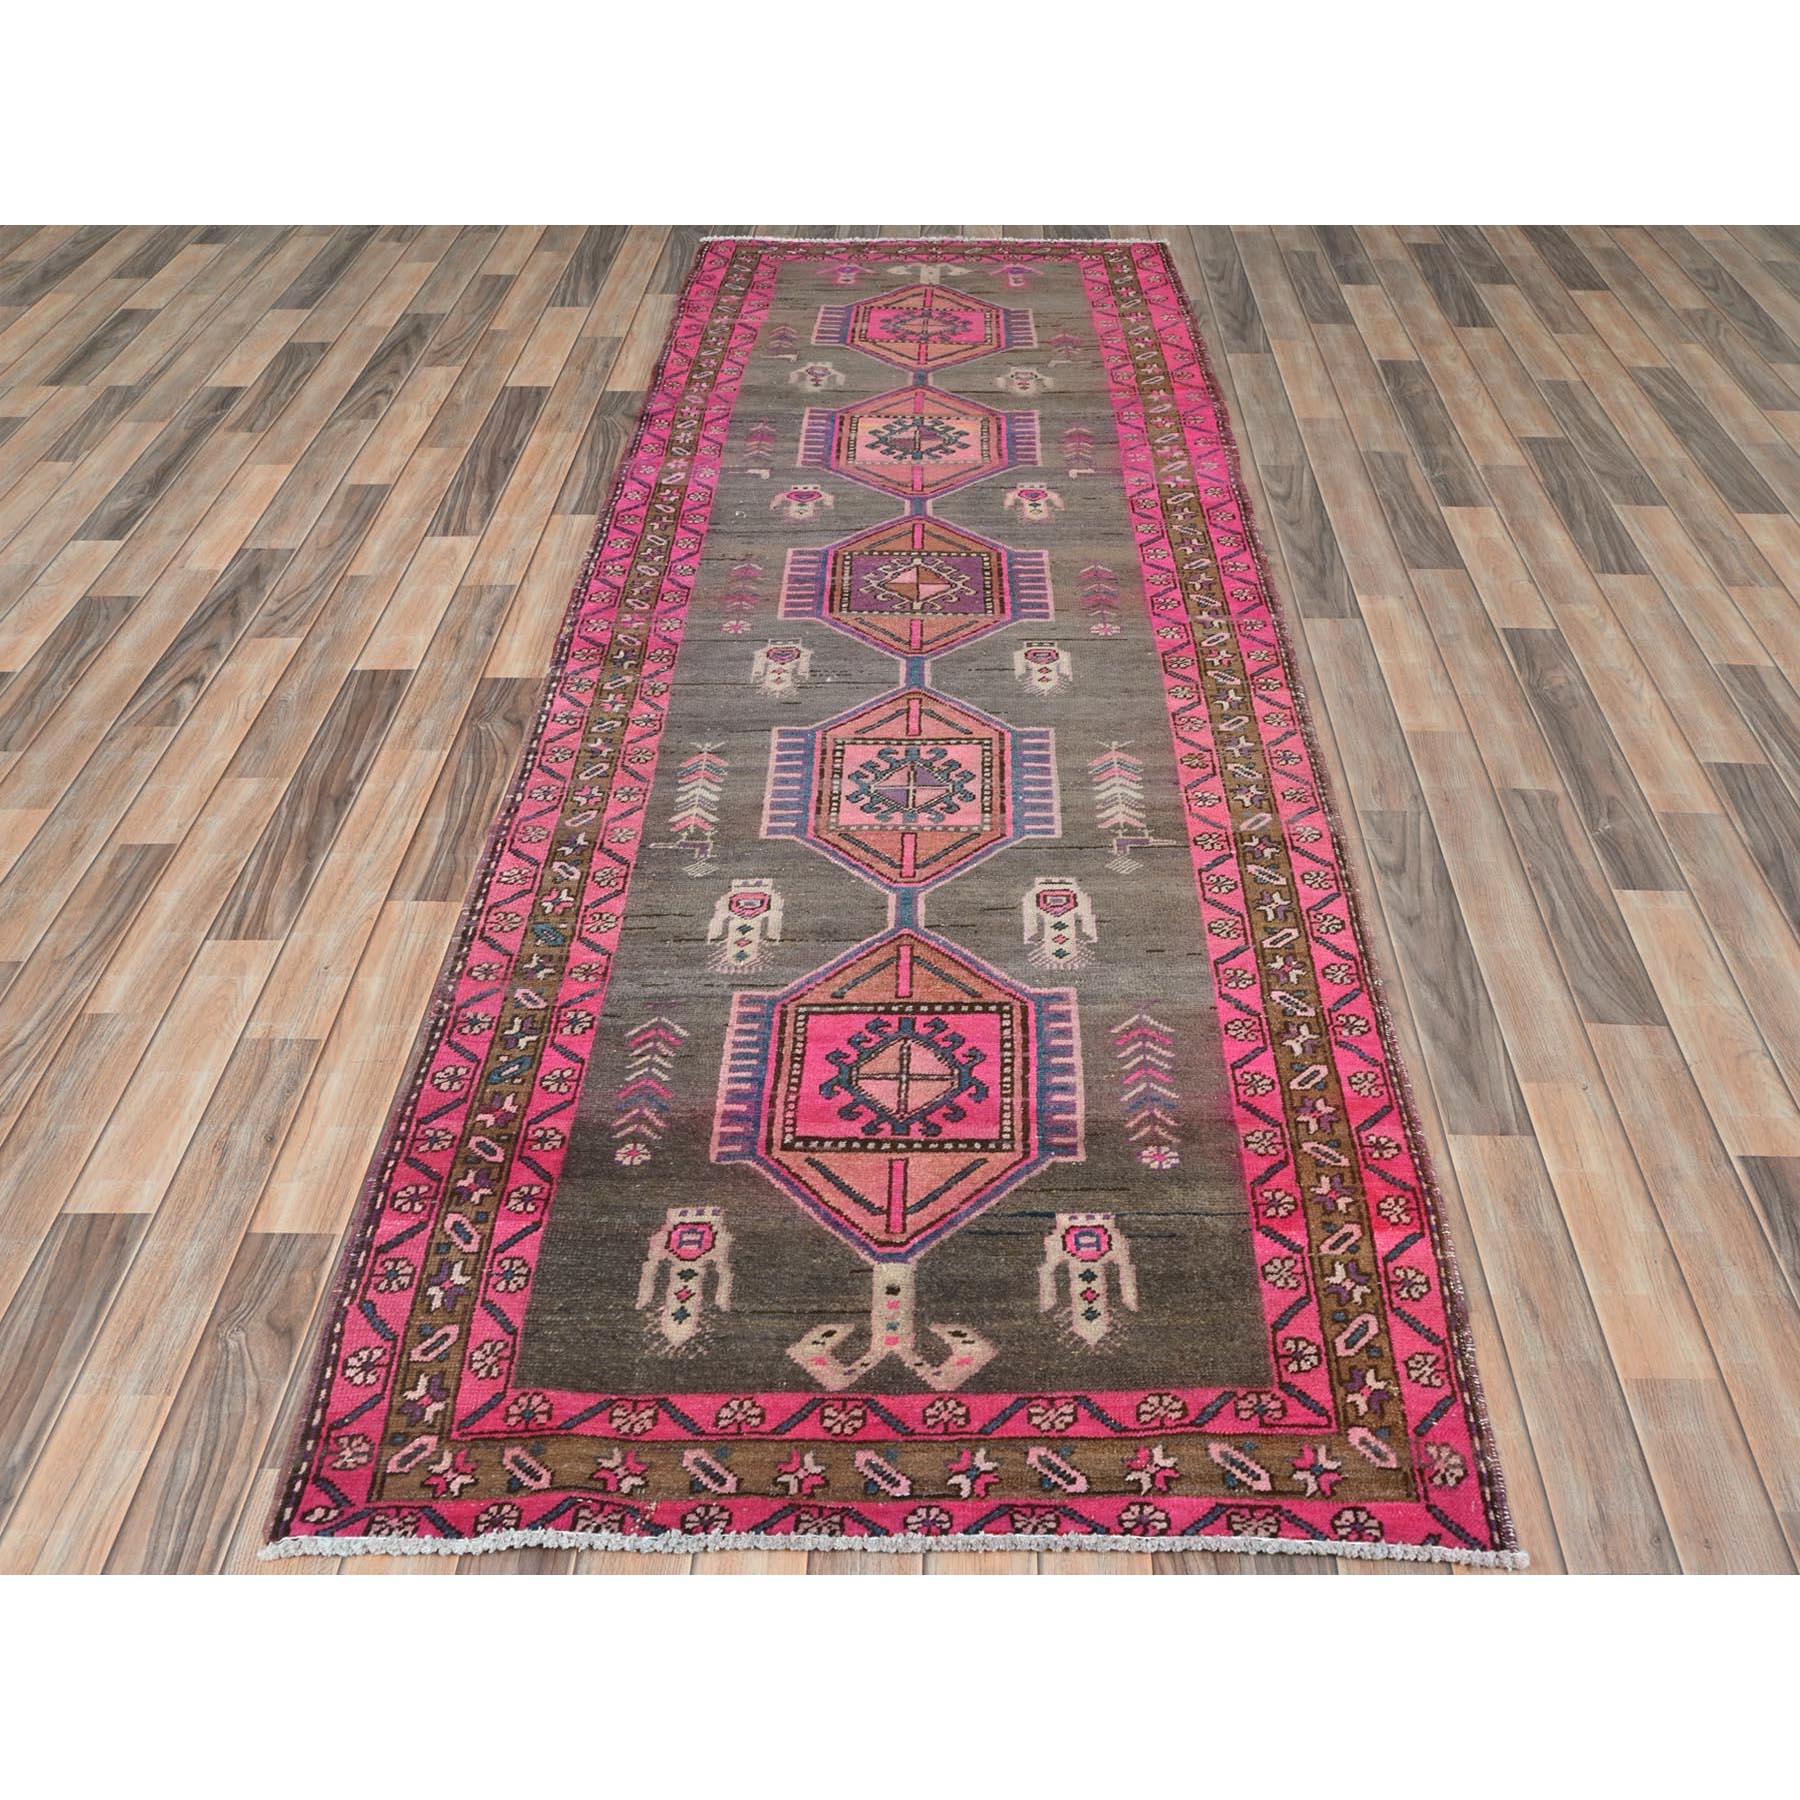 This fabulous Hand-Knotted carpet has been created and designed for extra strength and durability. This rug has been handcrafted for weeks in the traditional method that is used to make
Exact rug size in feet and inches : 3'7